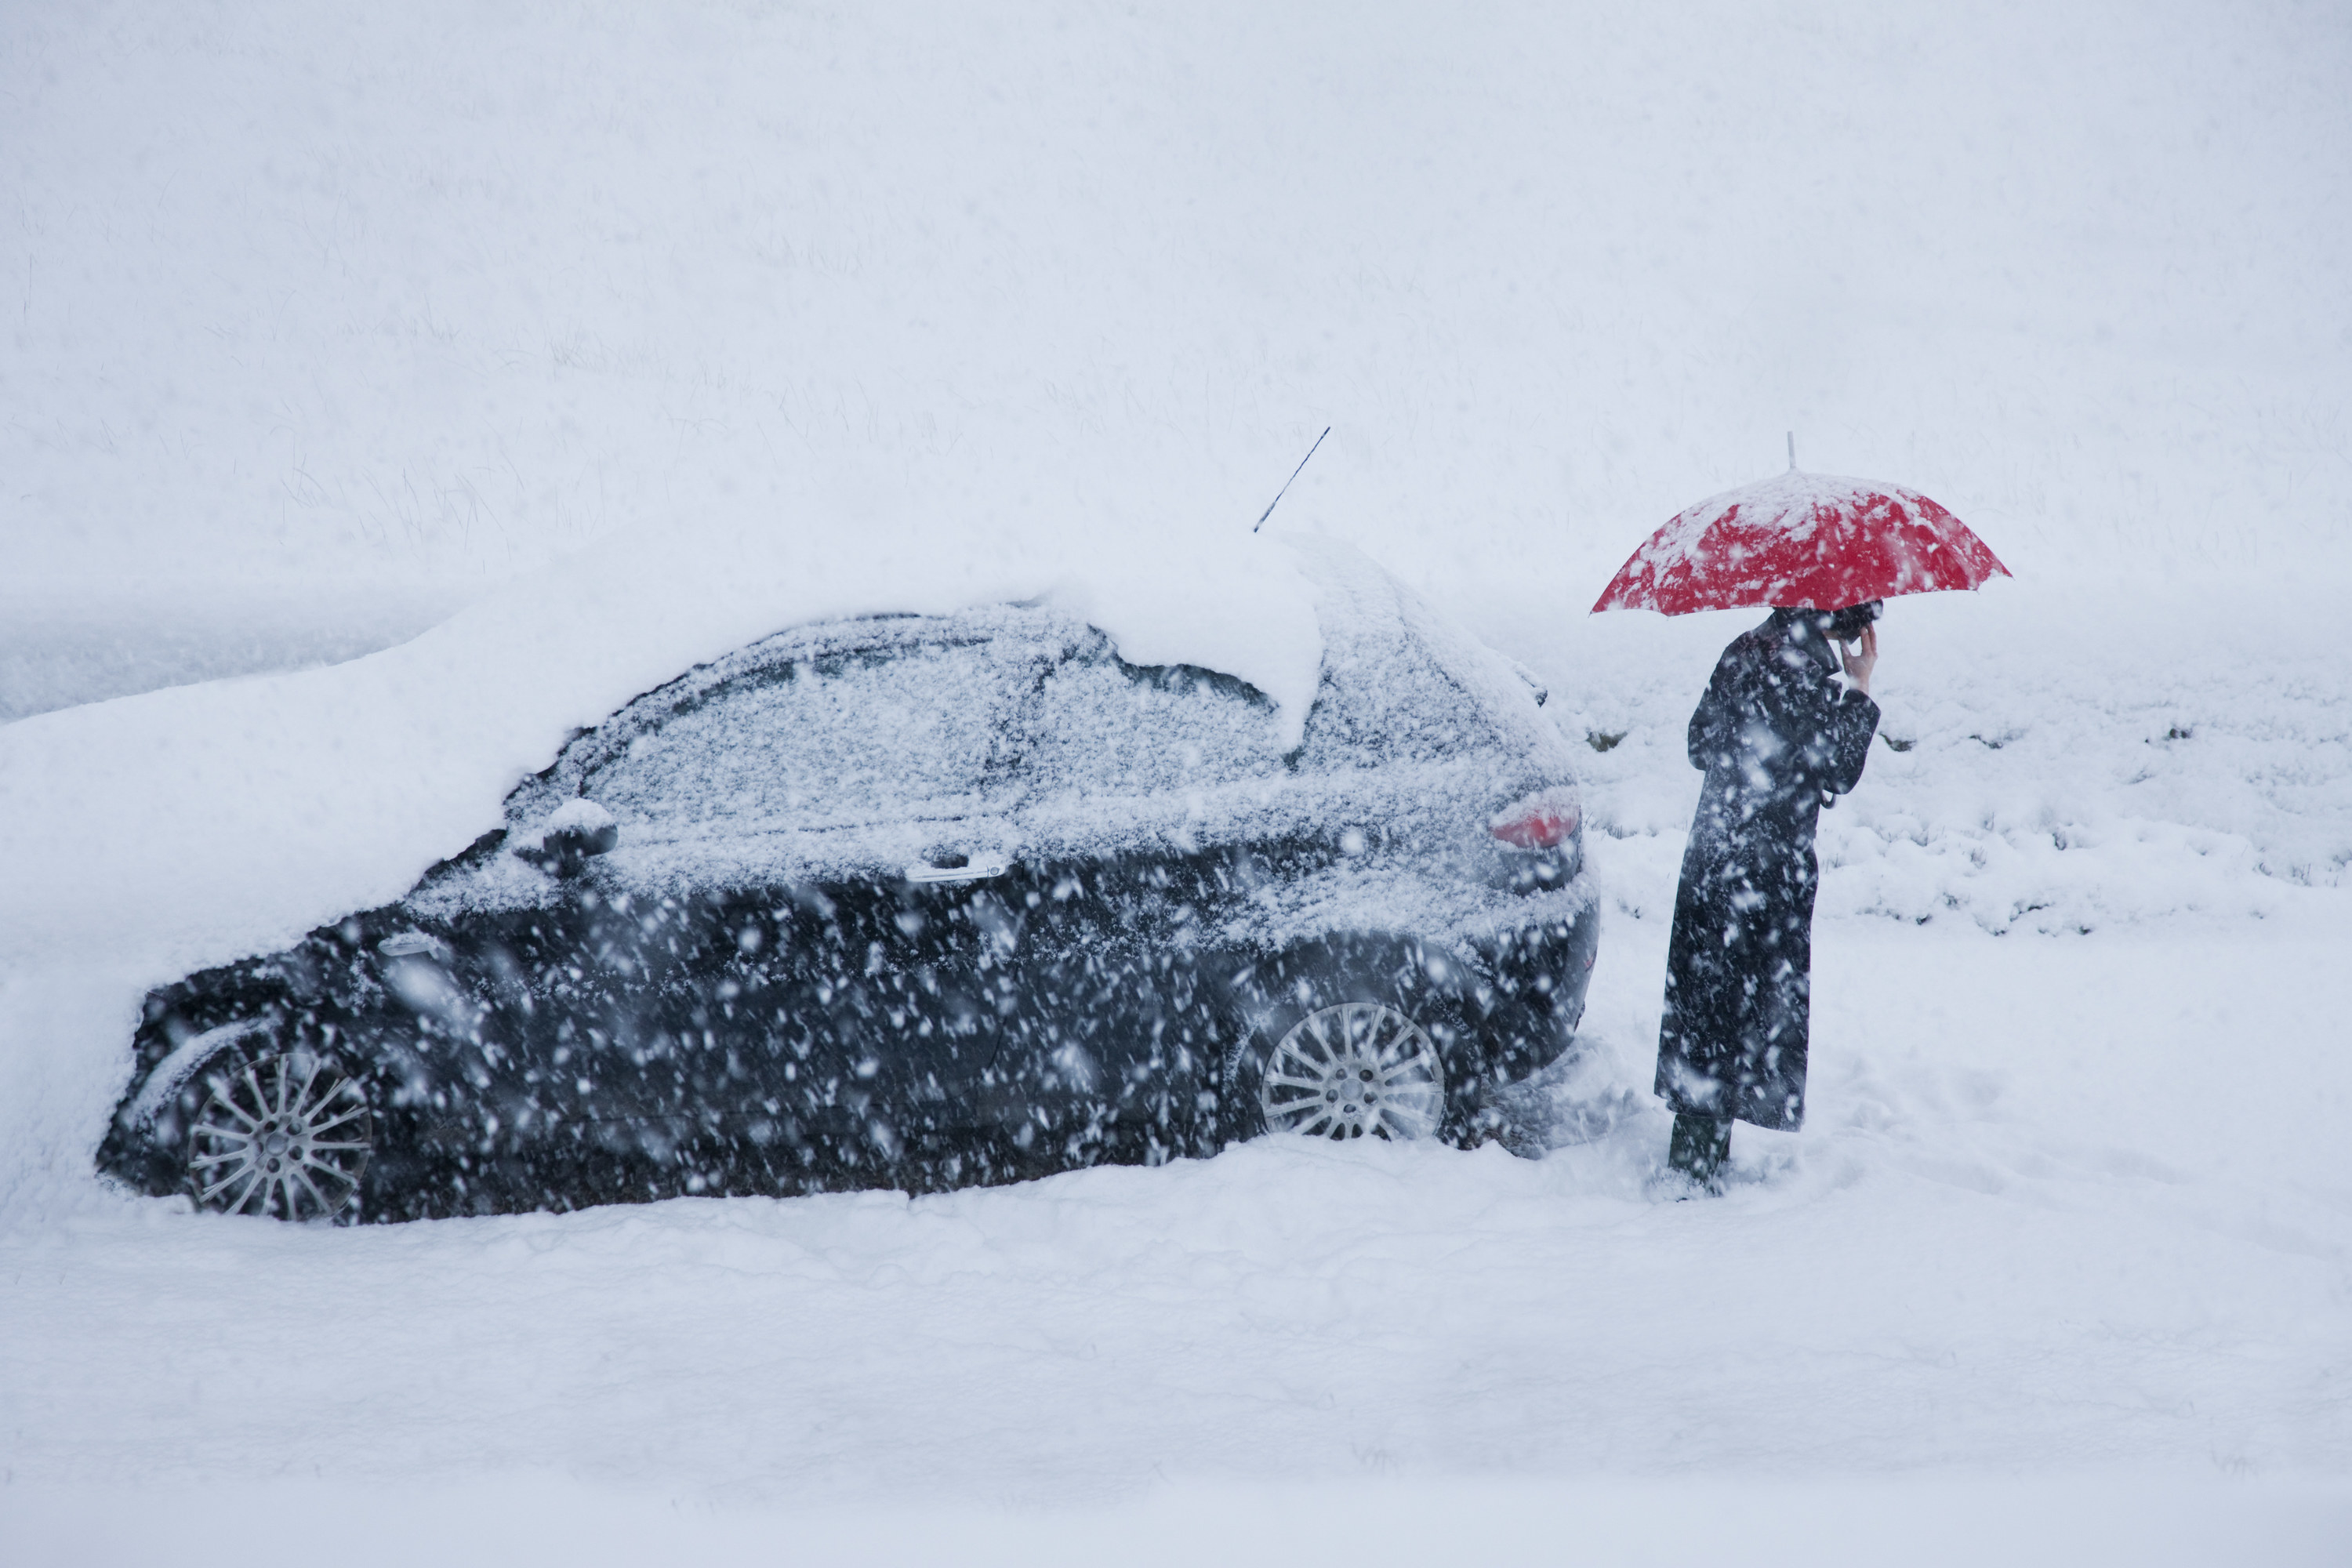 a car in a snowstorm with a person and an umbrella